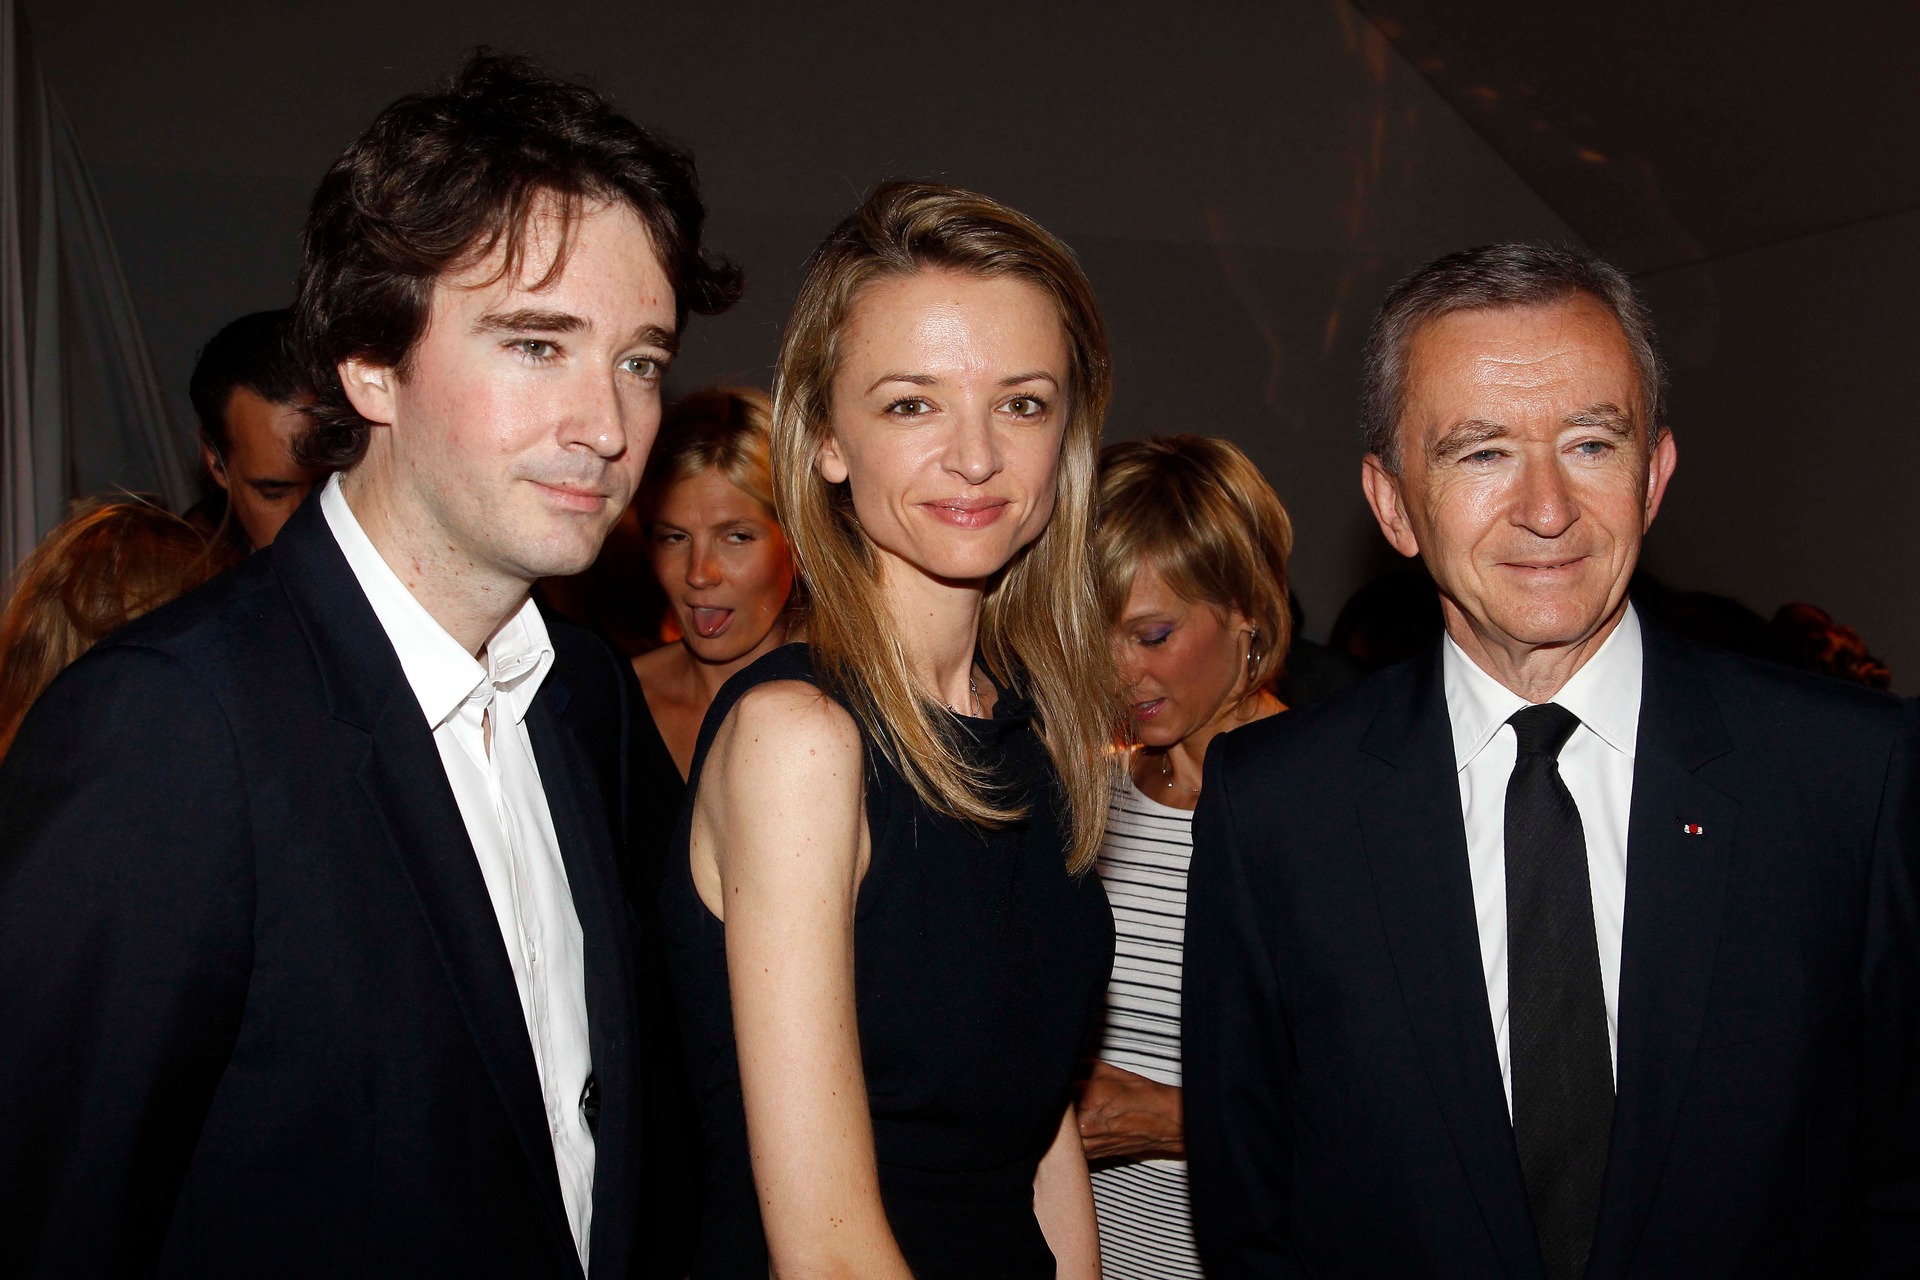 Lunch with the FT: Delphine Arnault